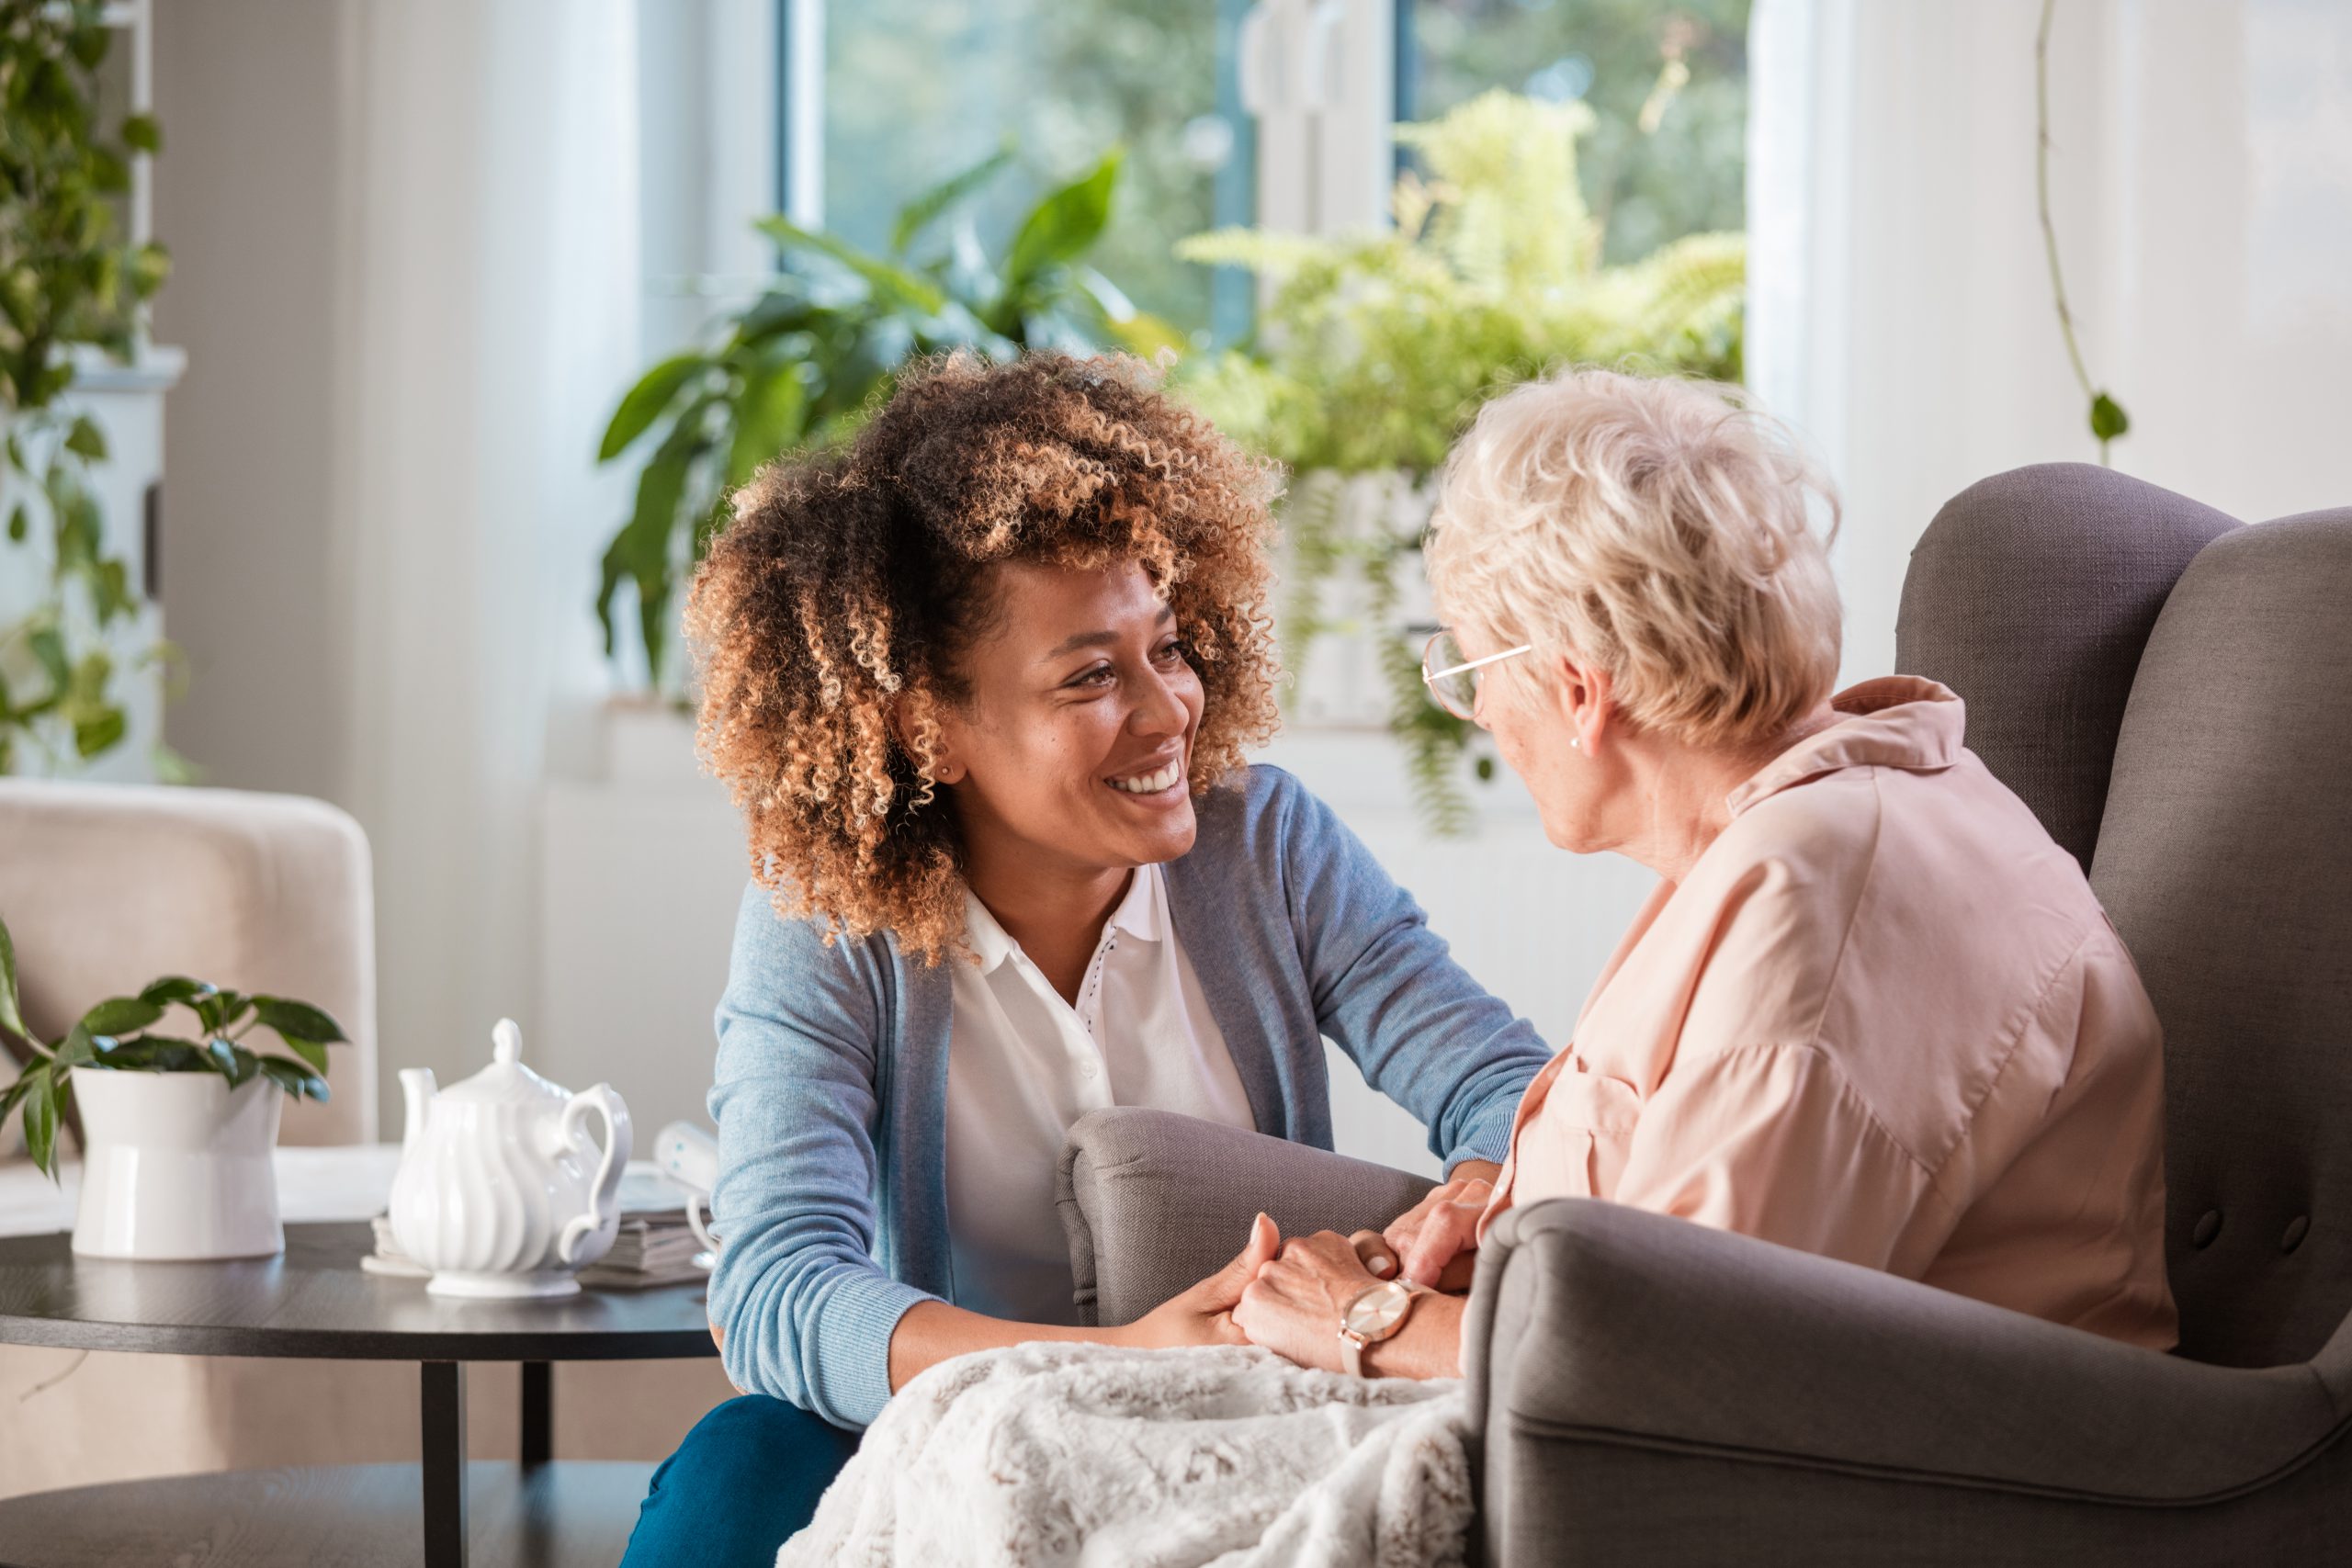 Leading the workforce through the ‘once-in-a-generation’ Aged Care reform: three recommendations from Aged Care experts